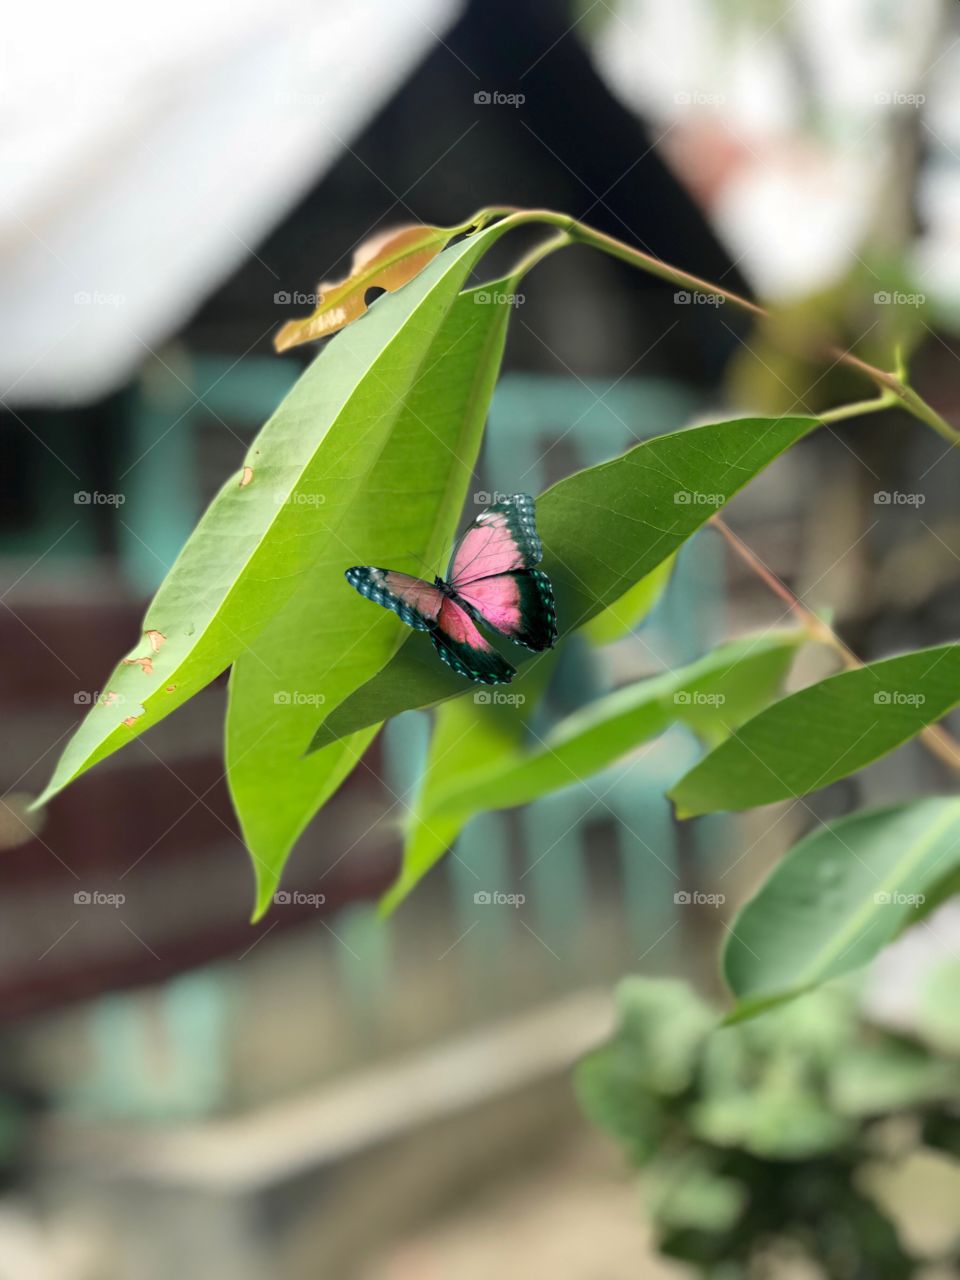 Village nature by blackberry tree branch butterfly sitting on leaf 